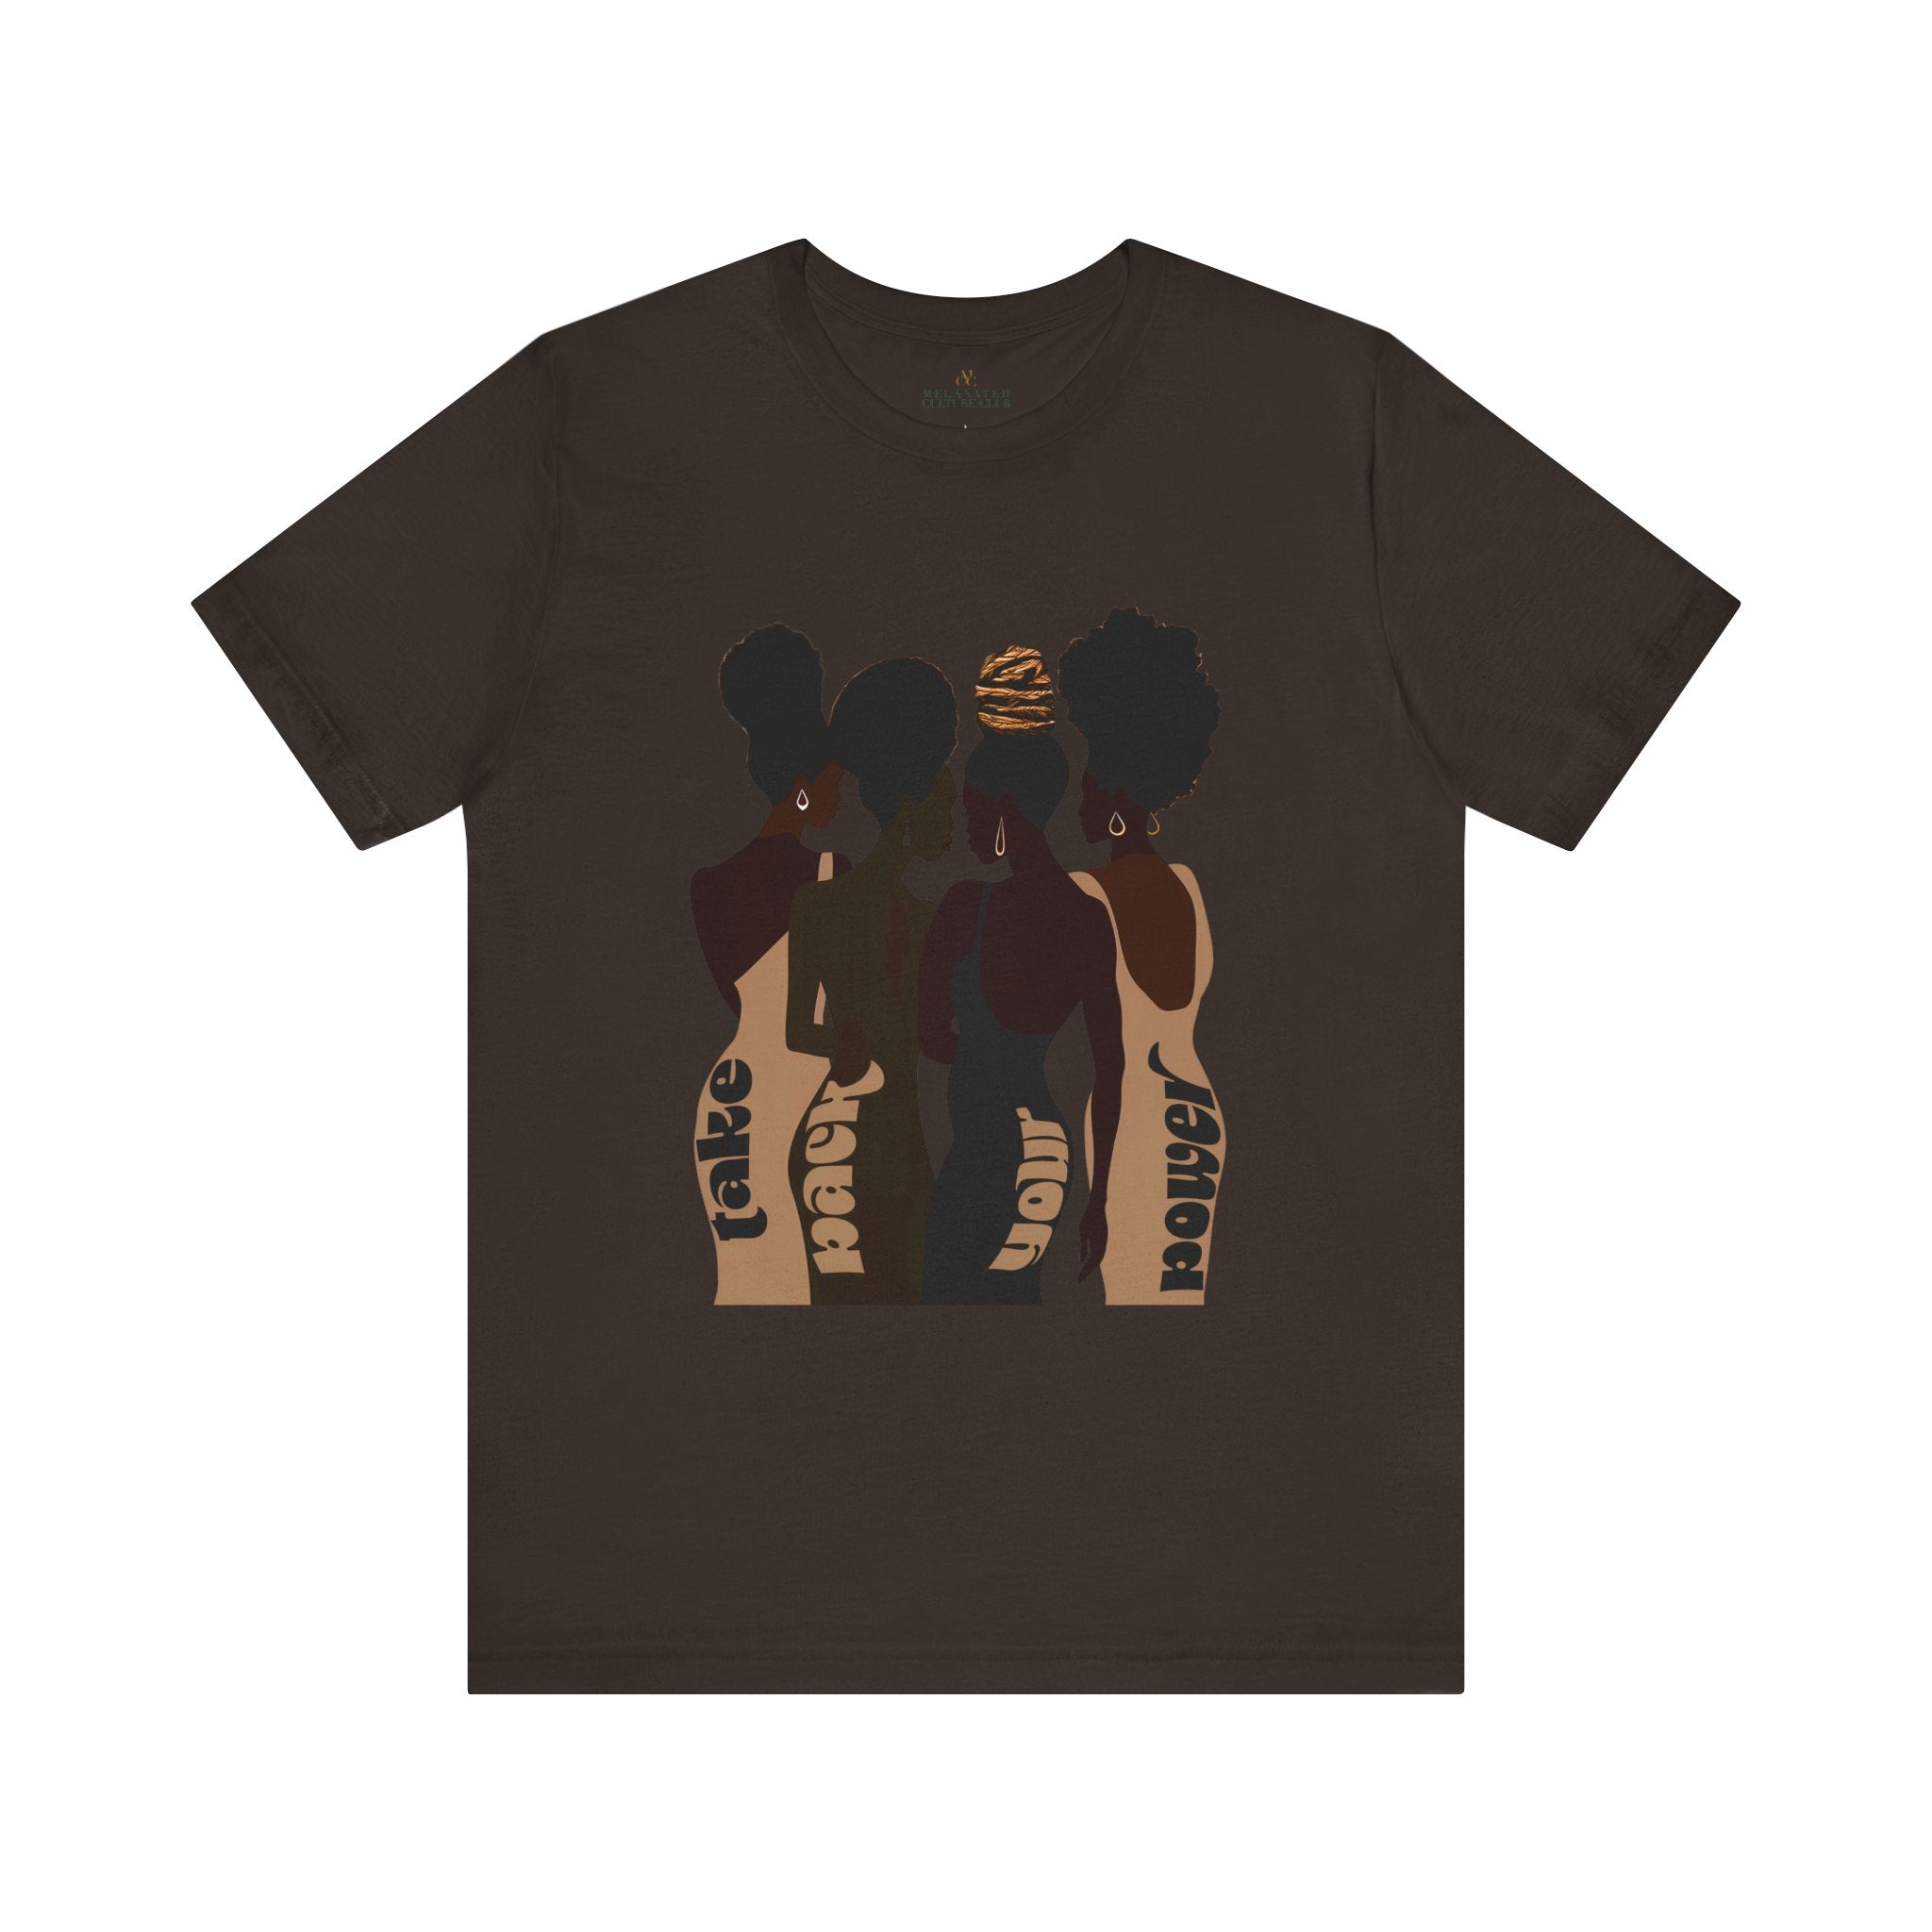 African American Women Tee Take Back Your Power Shirt in brown.